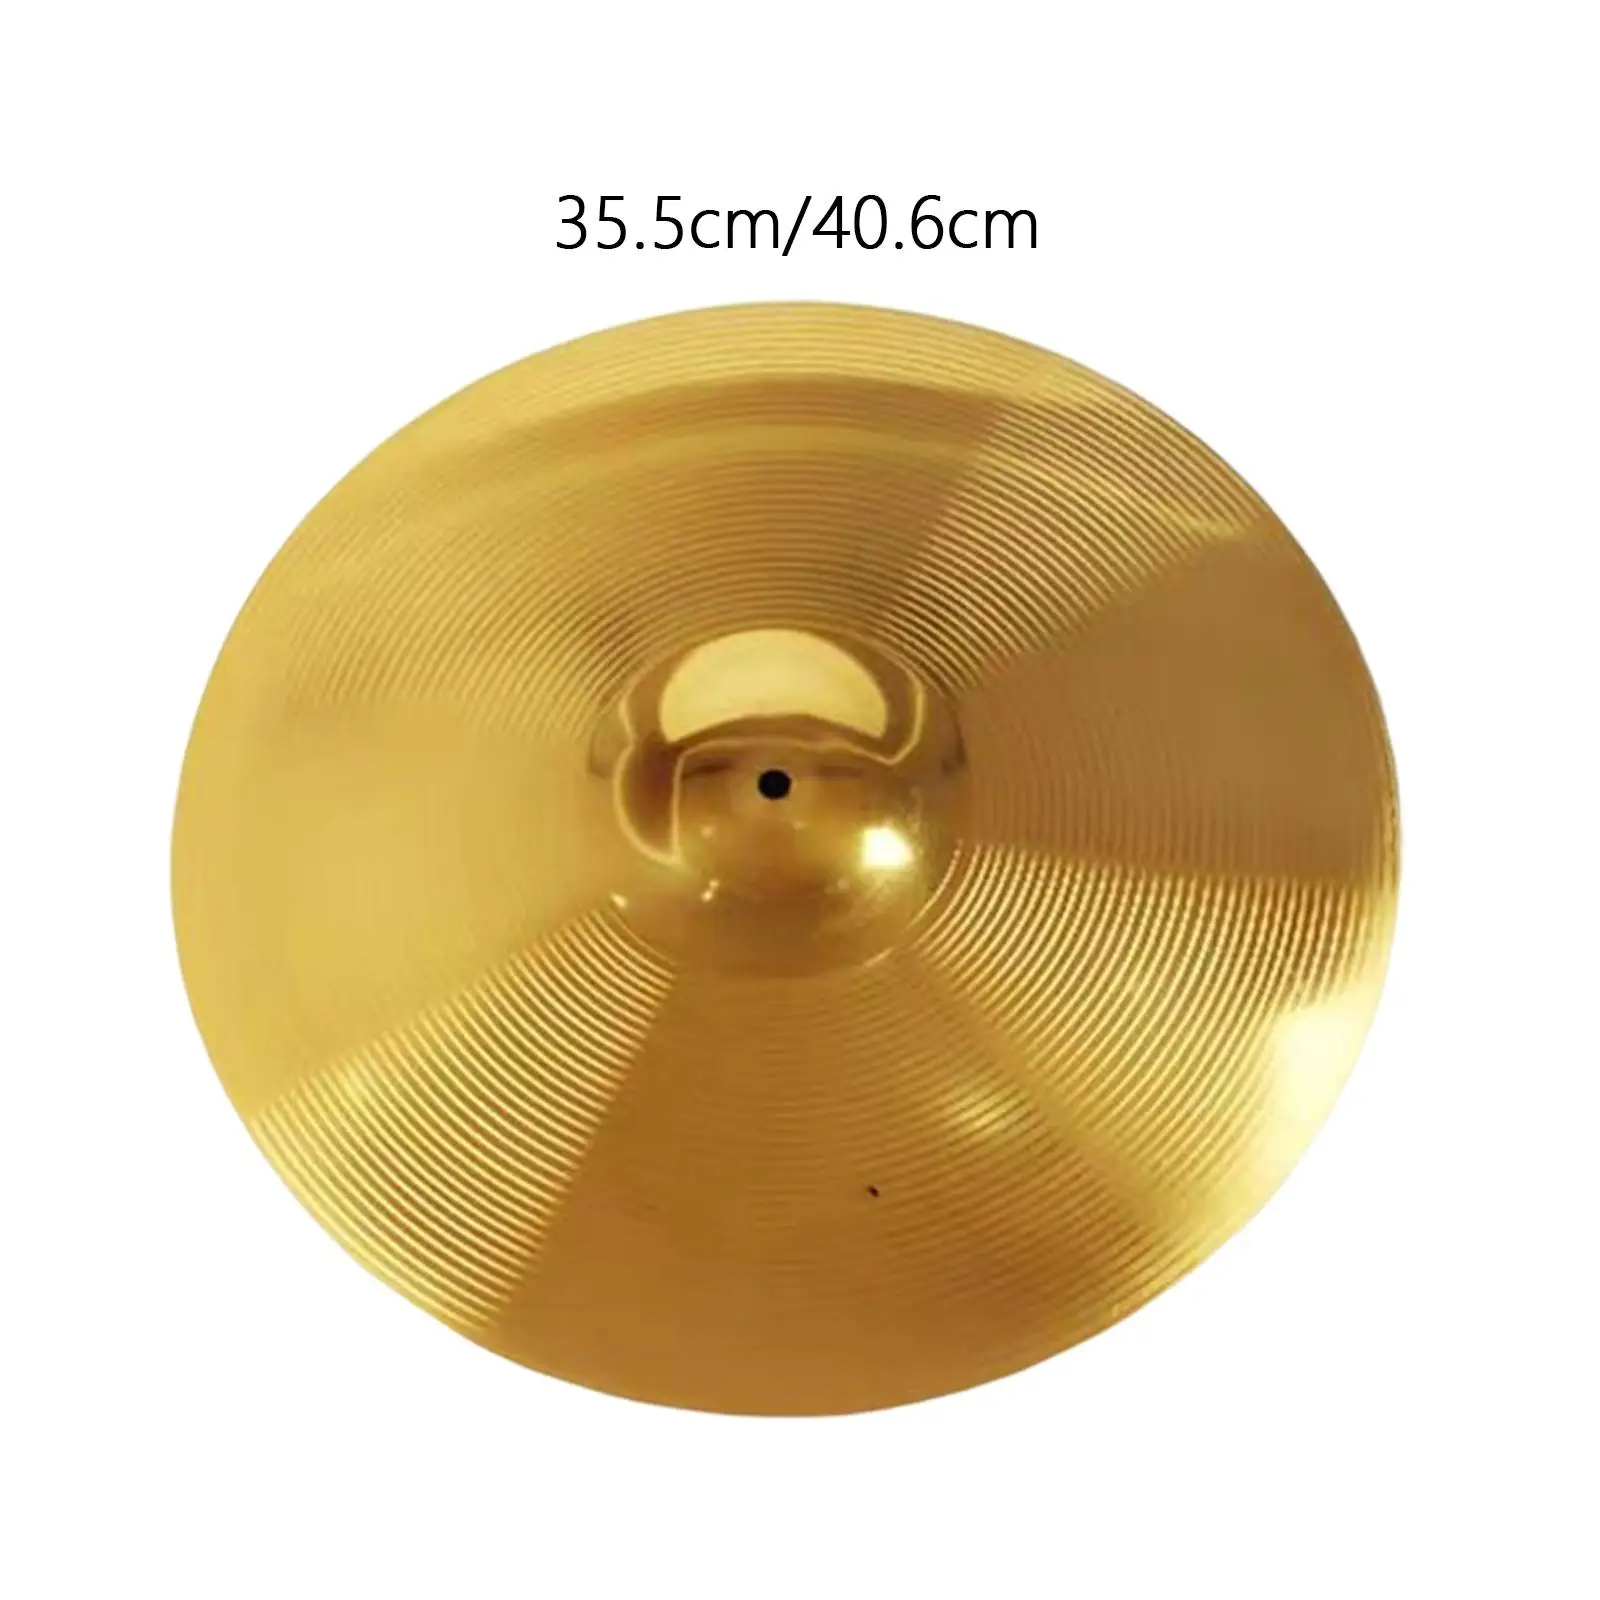 Brass Drum Cymbals Accessory Performance Stage Accessory Professional Replacements Replacements Cymbals Crash for Drum Set